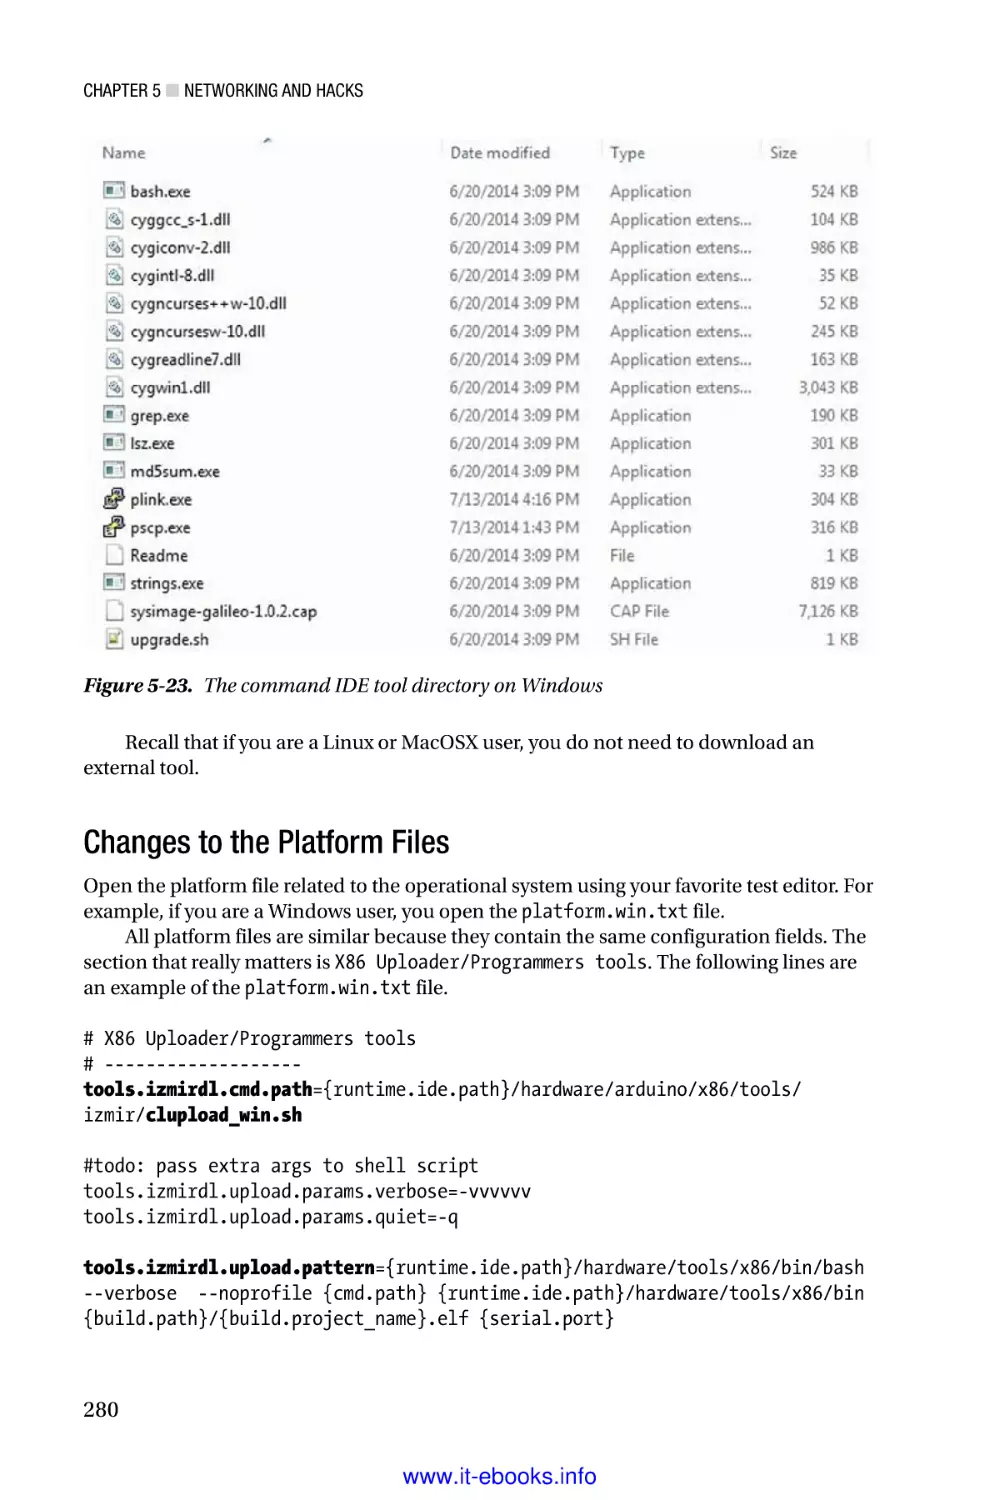 Changes to the Platform Files